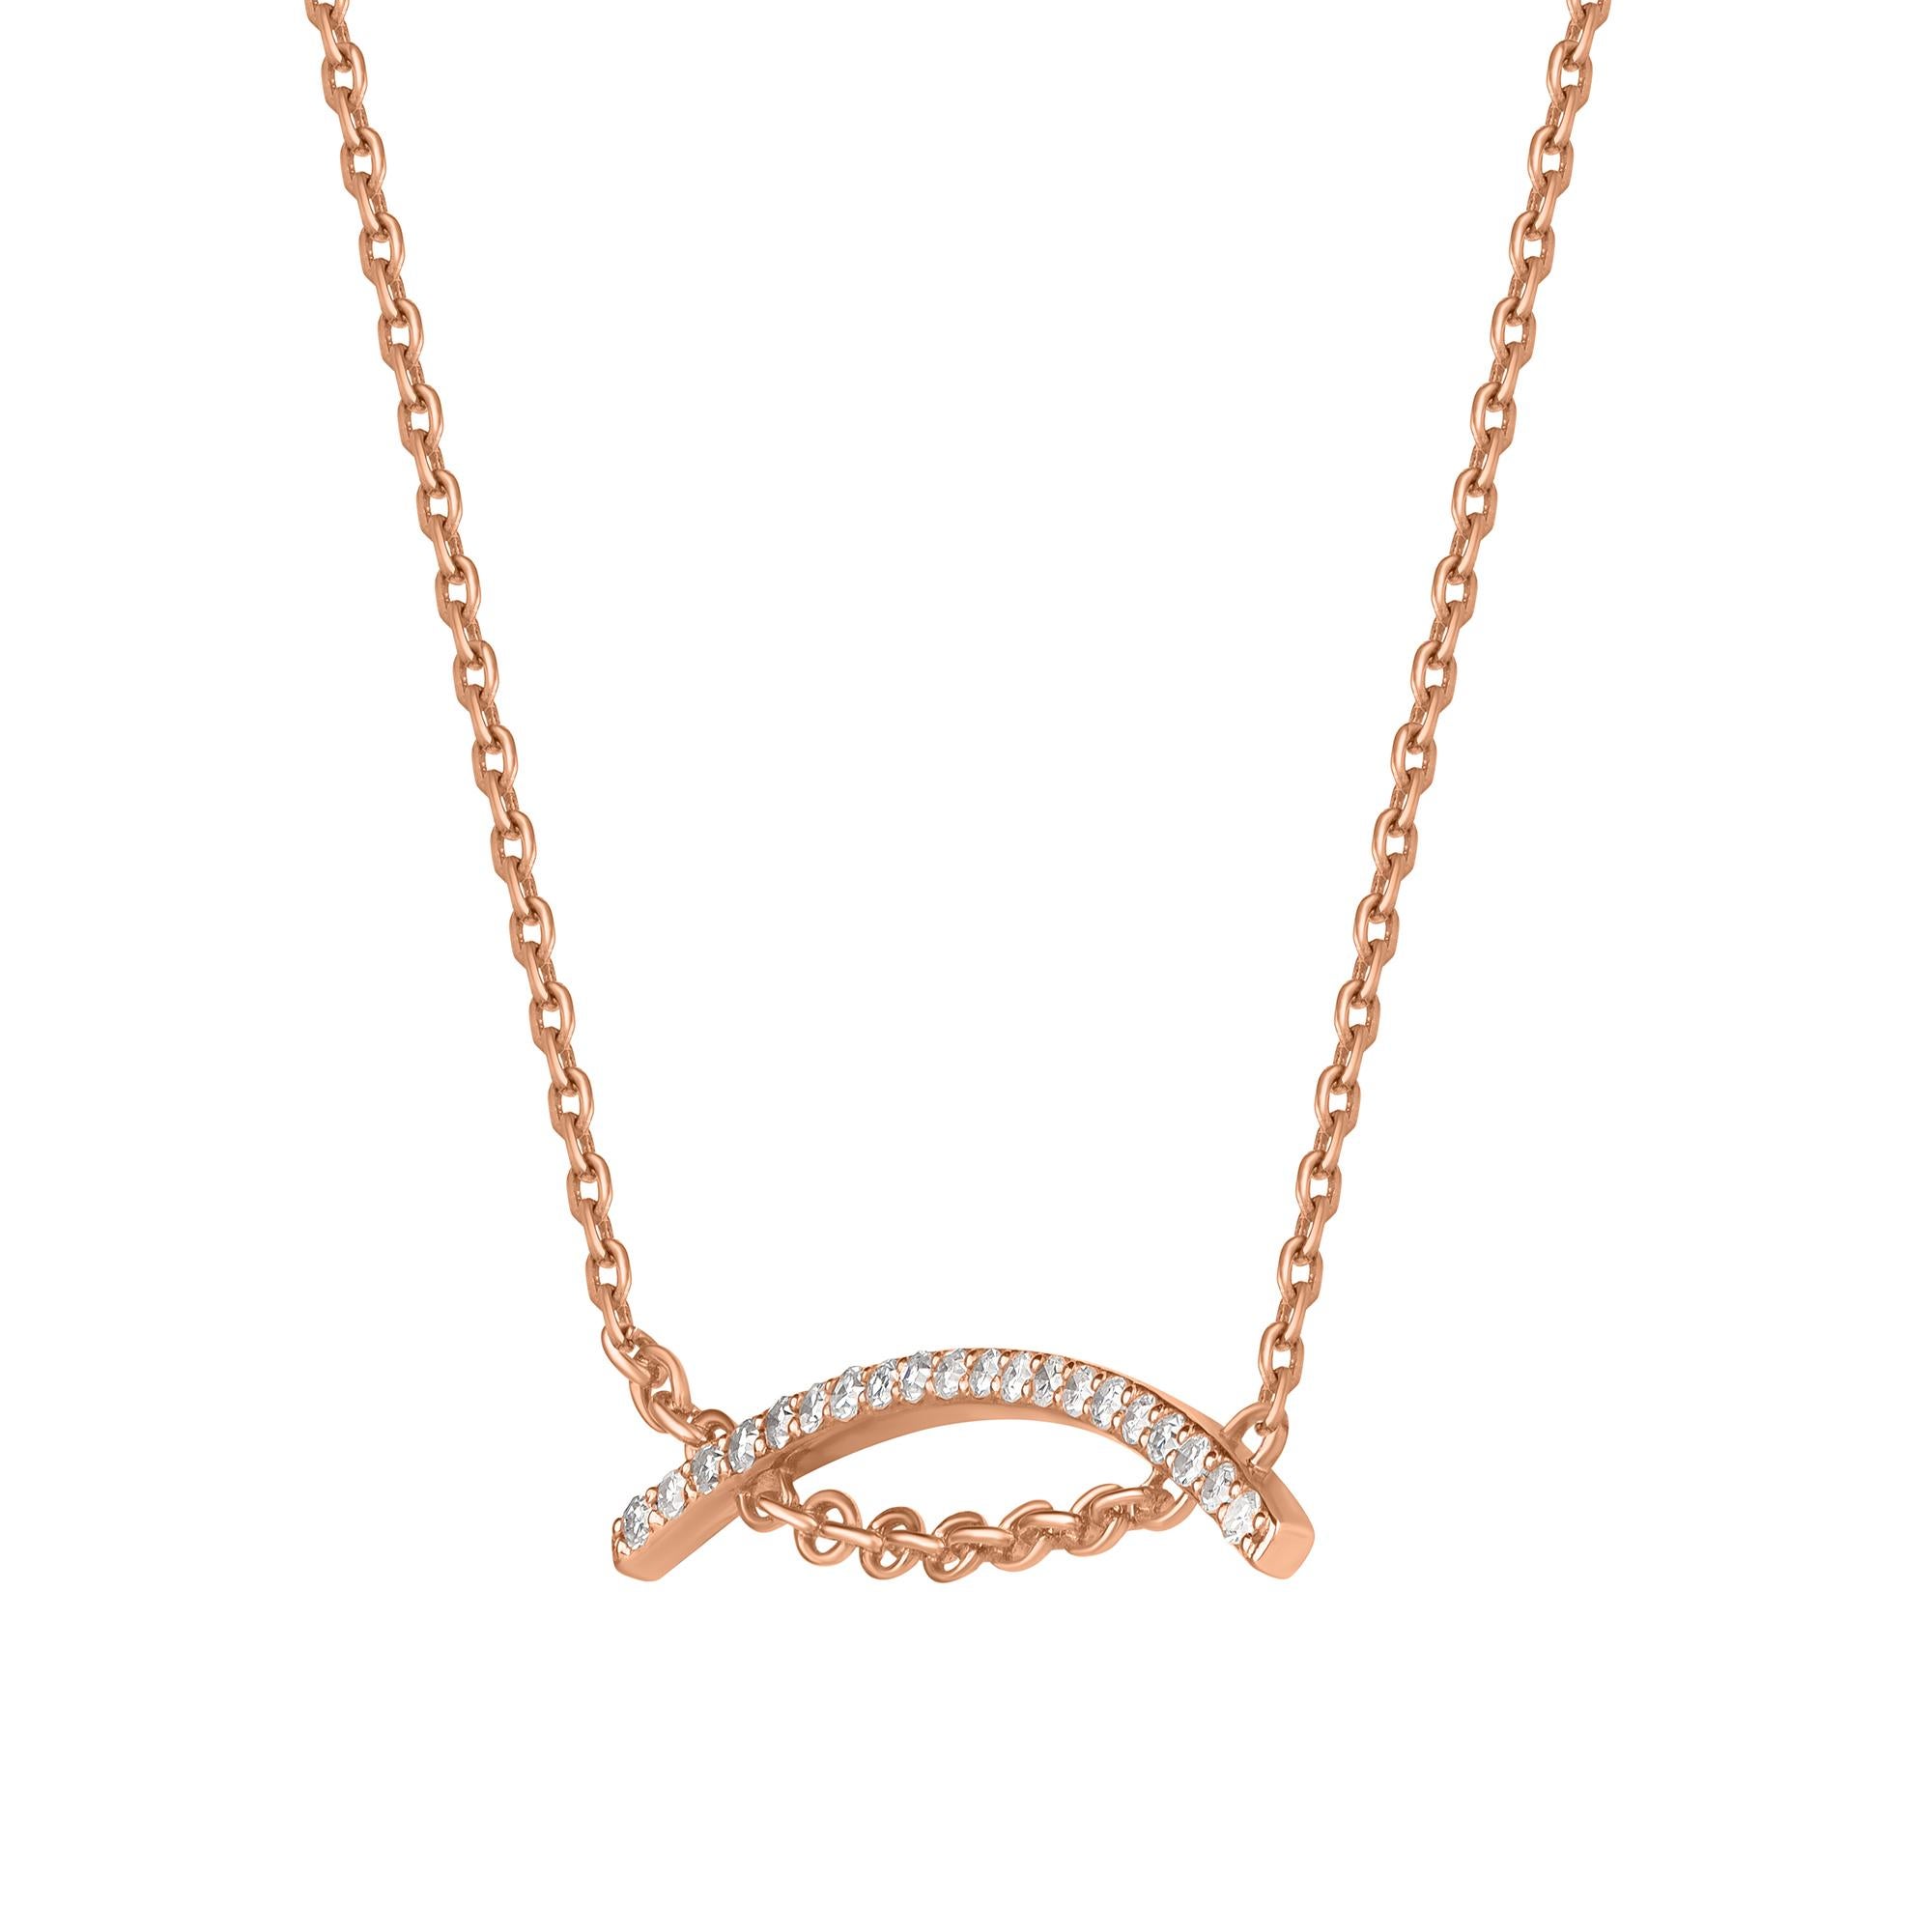 A strikingly diamond necklace that is handcrafted in 18 karat rose gold and embedded with 20 round diamonds in prong setting. Diamonds are graded HI color, I1 clarity. 